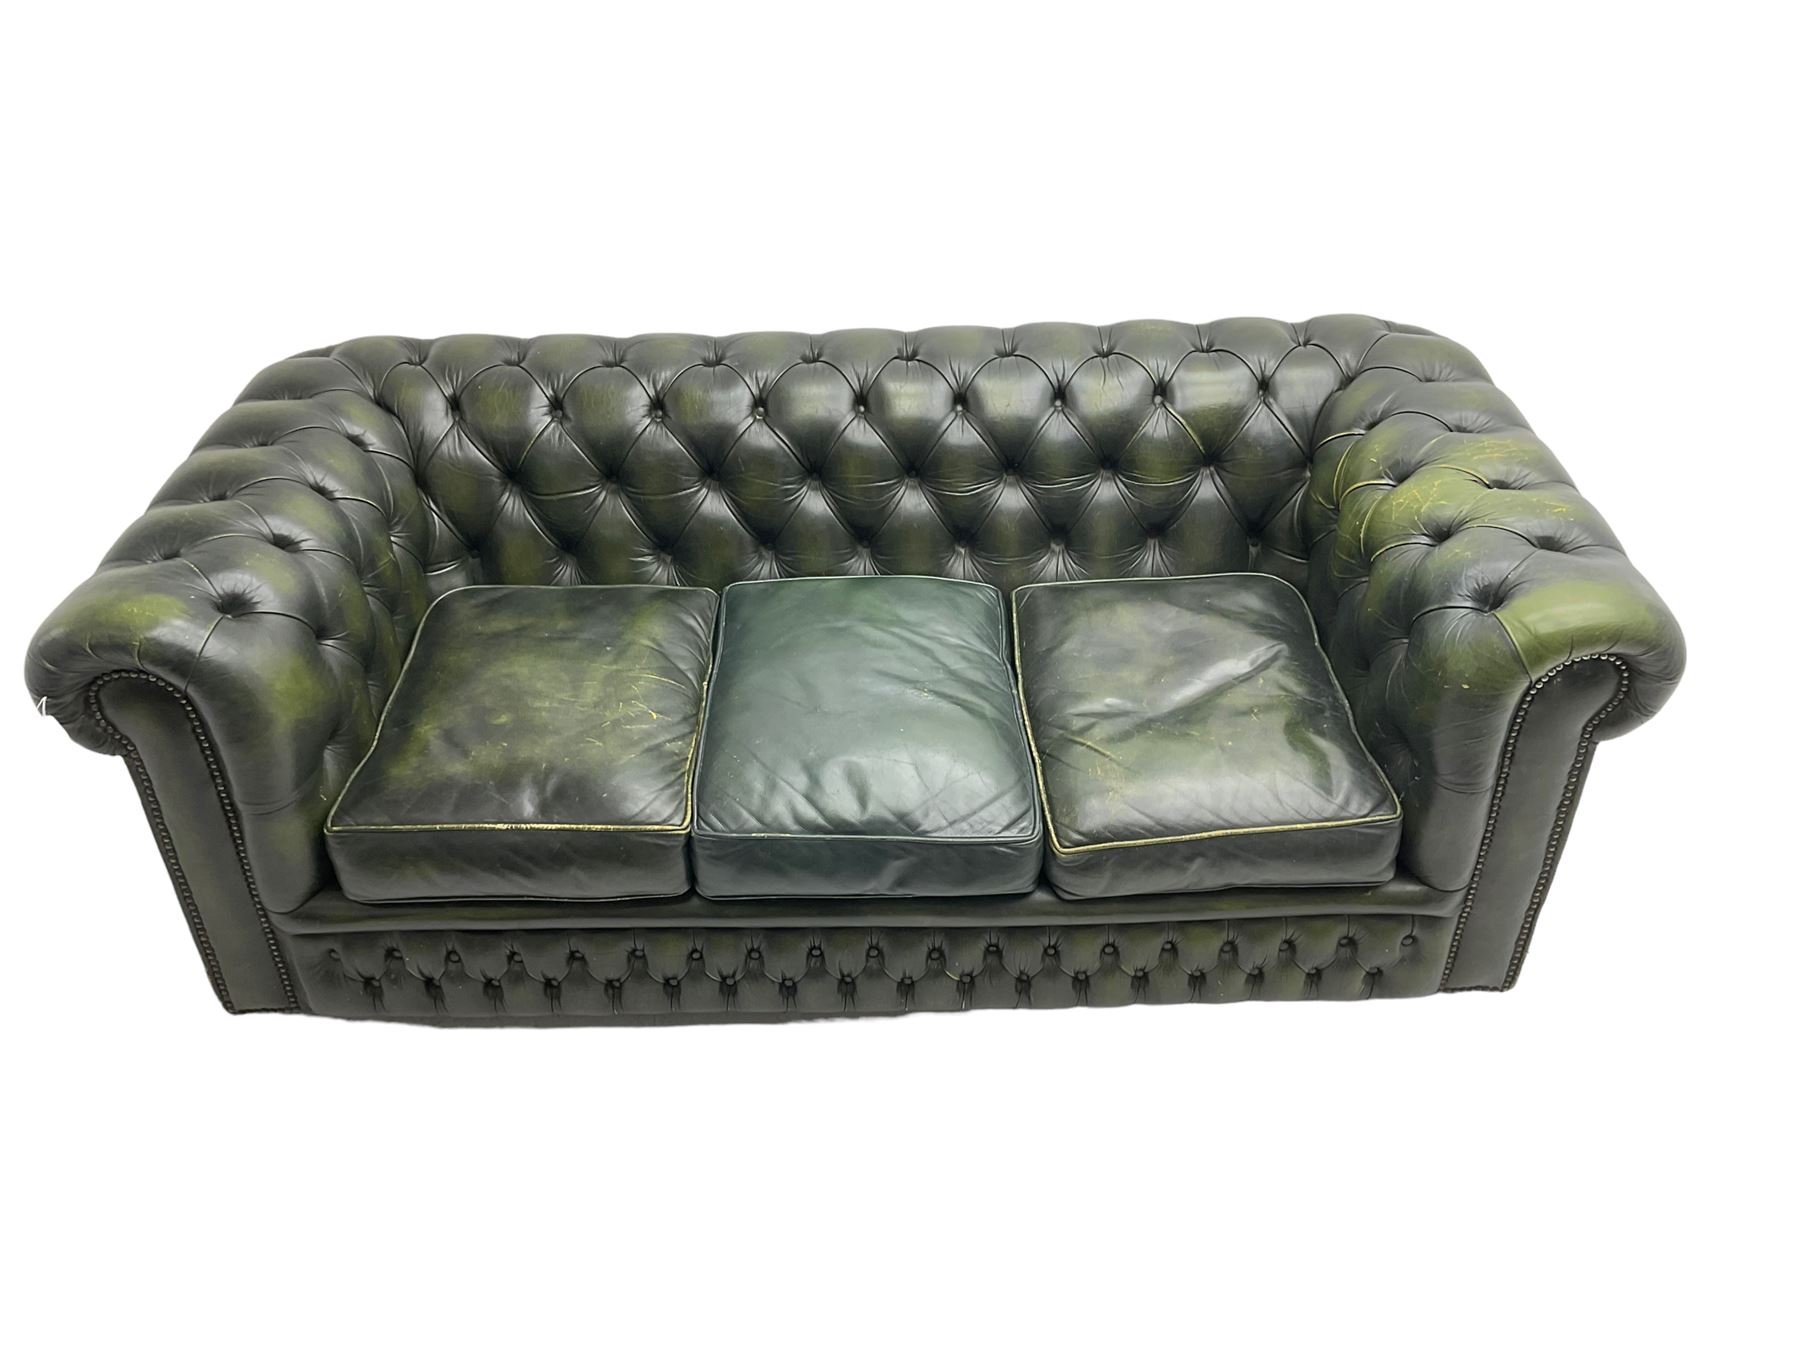 Chesterfield three seat sofa - Image 3 of 7